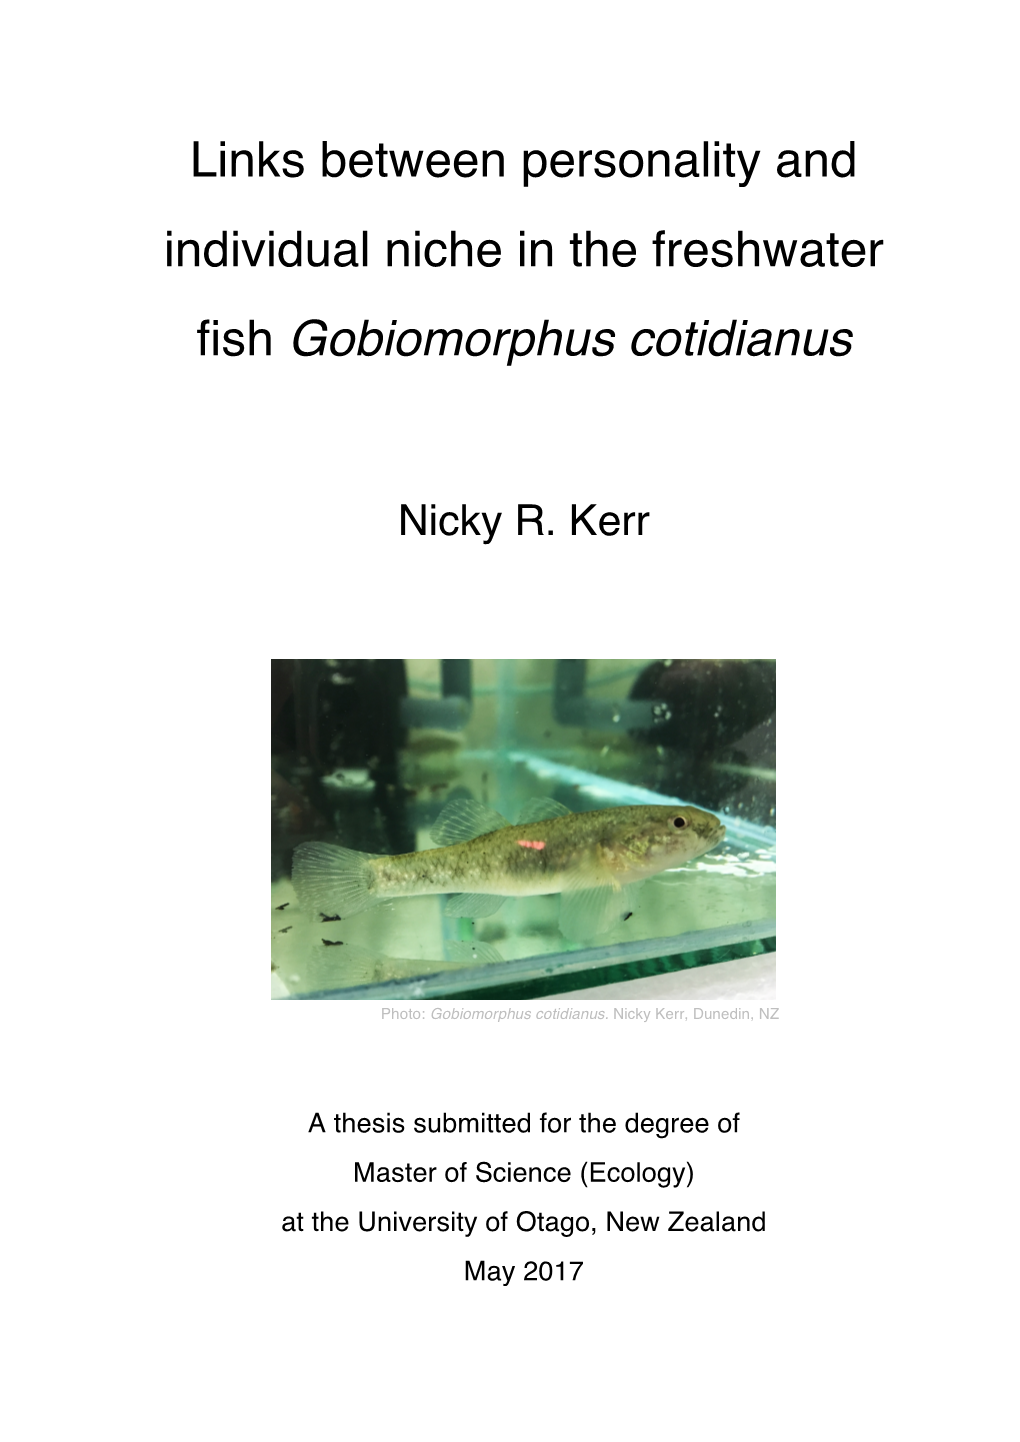 Links Between Personality and Individual Niche in the Freshwater Fish Gobiomorphus Cotidianus